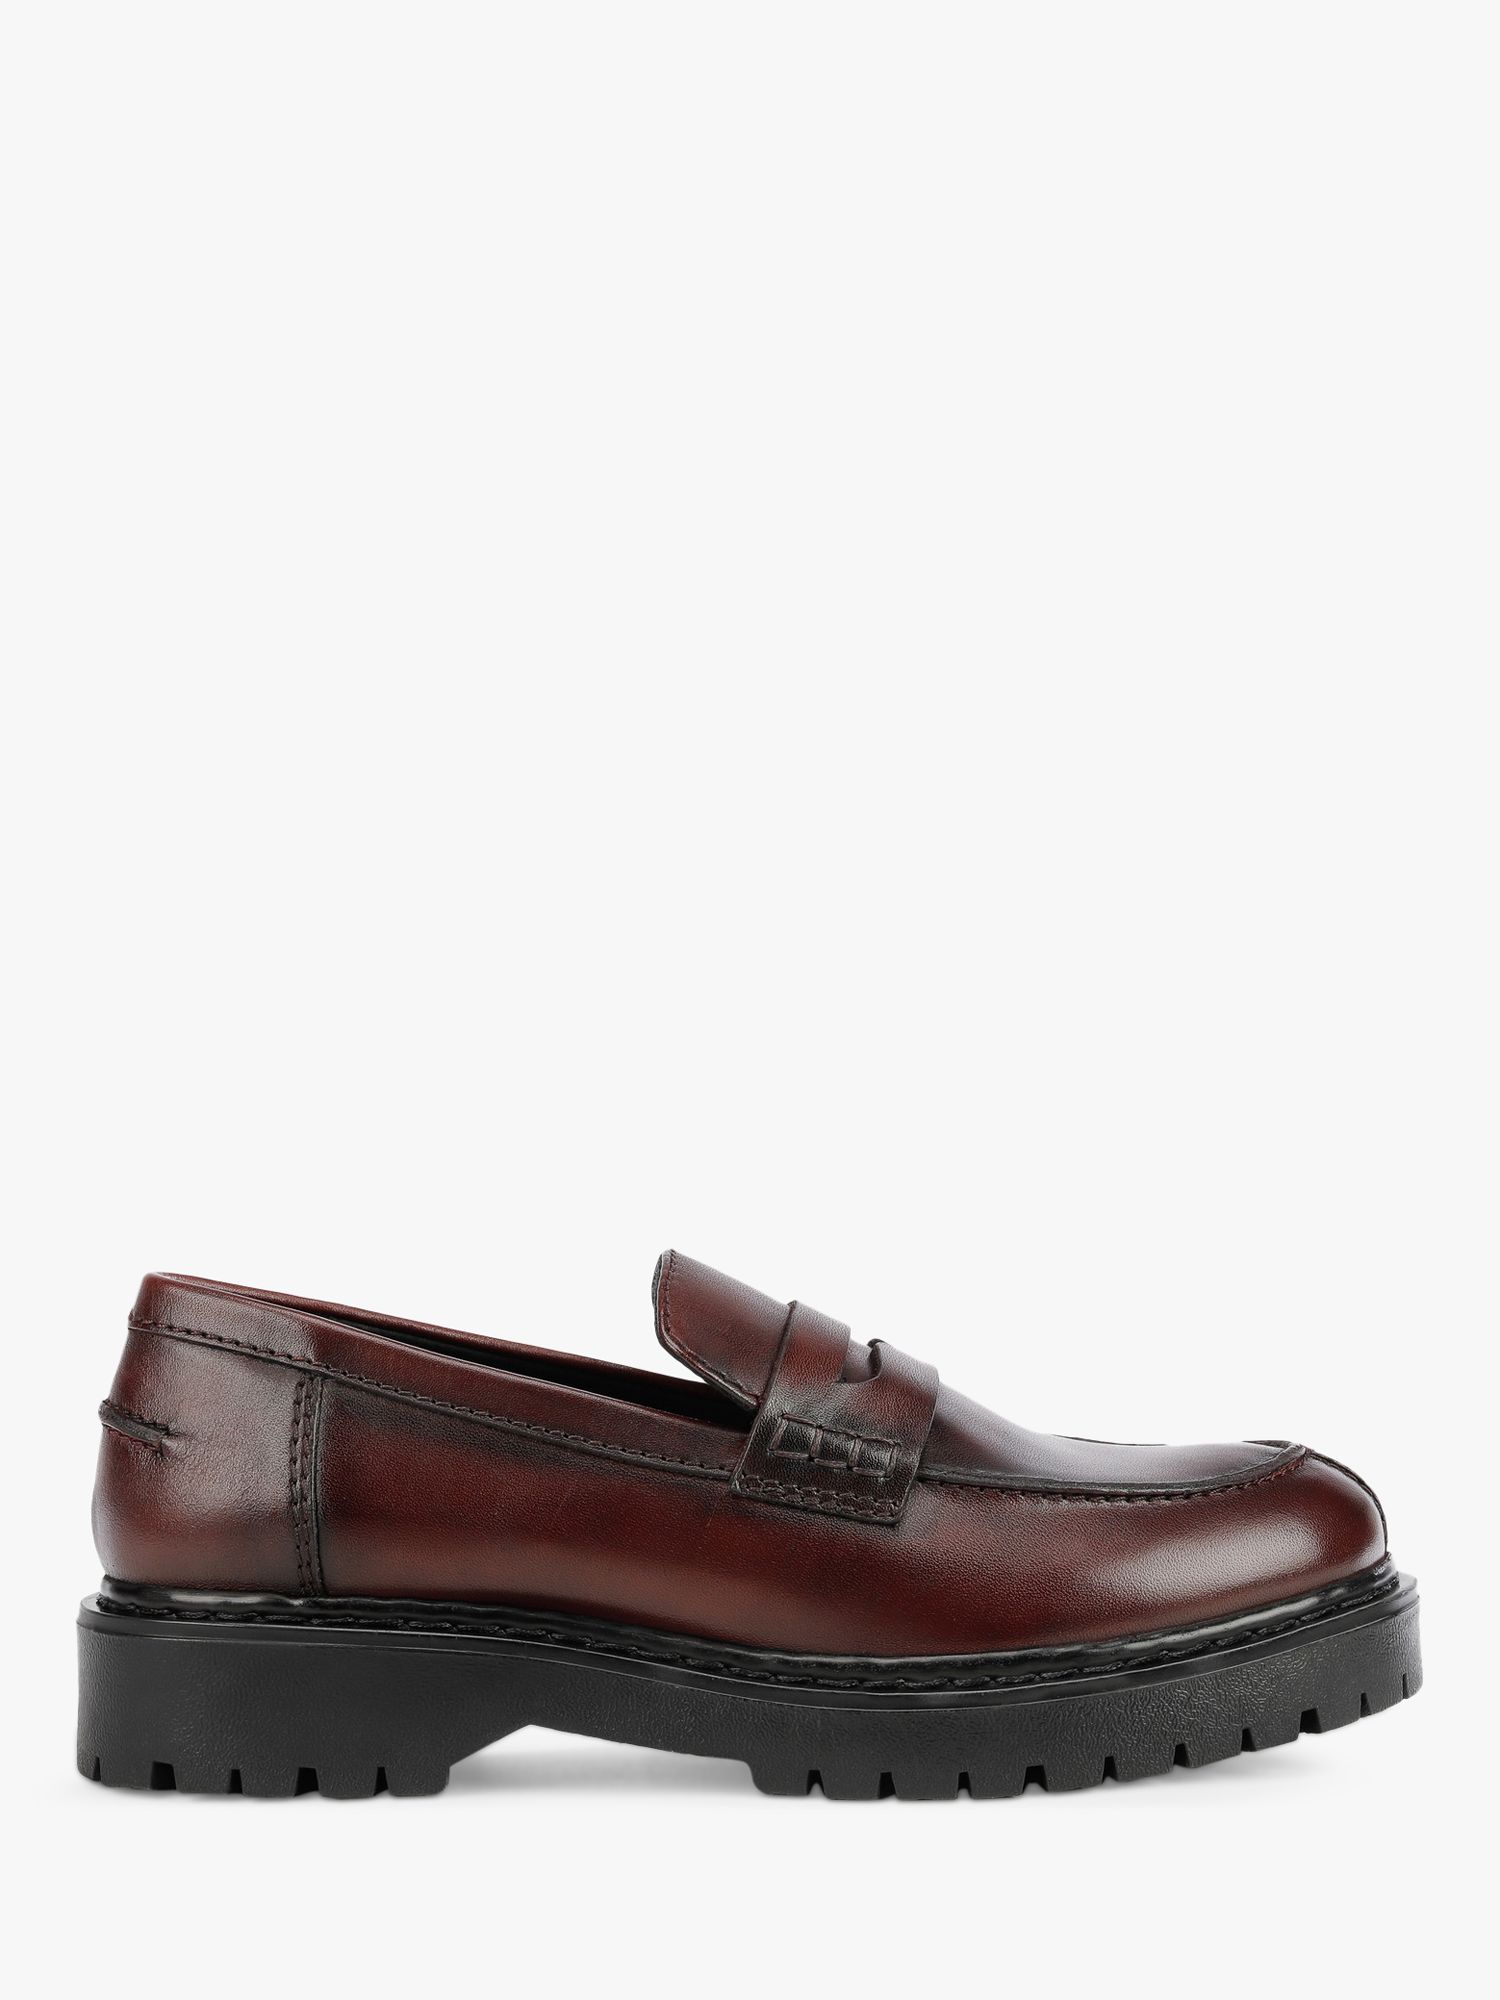 Geox Women's Bleyze Leather Loafers, Bordeaux at John Lewis & Partners